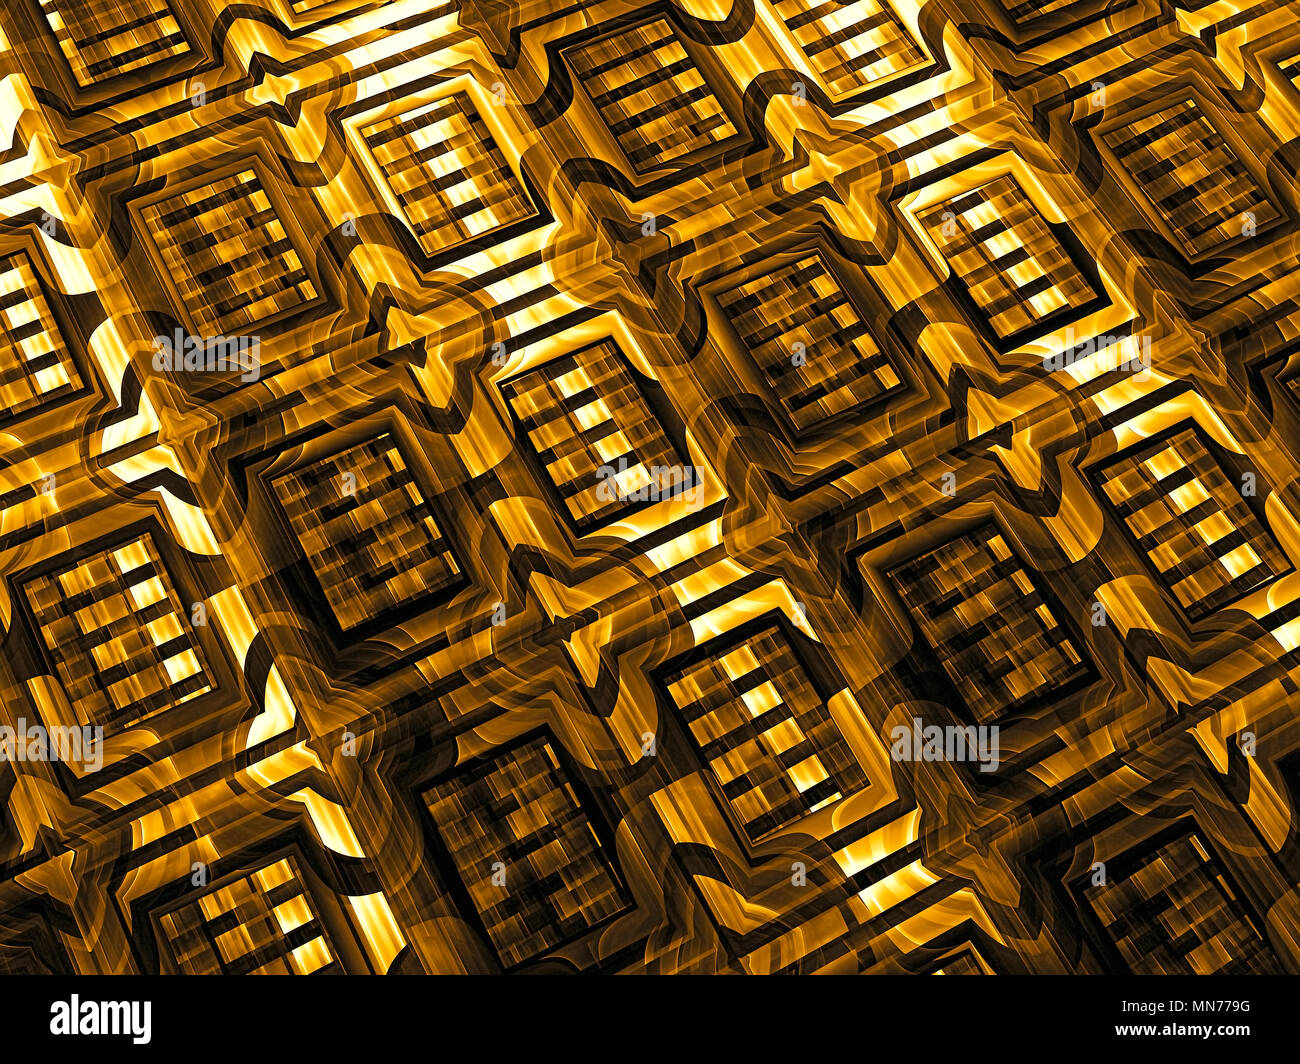 Golden texture - abstract digitally generated image Stock Photo